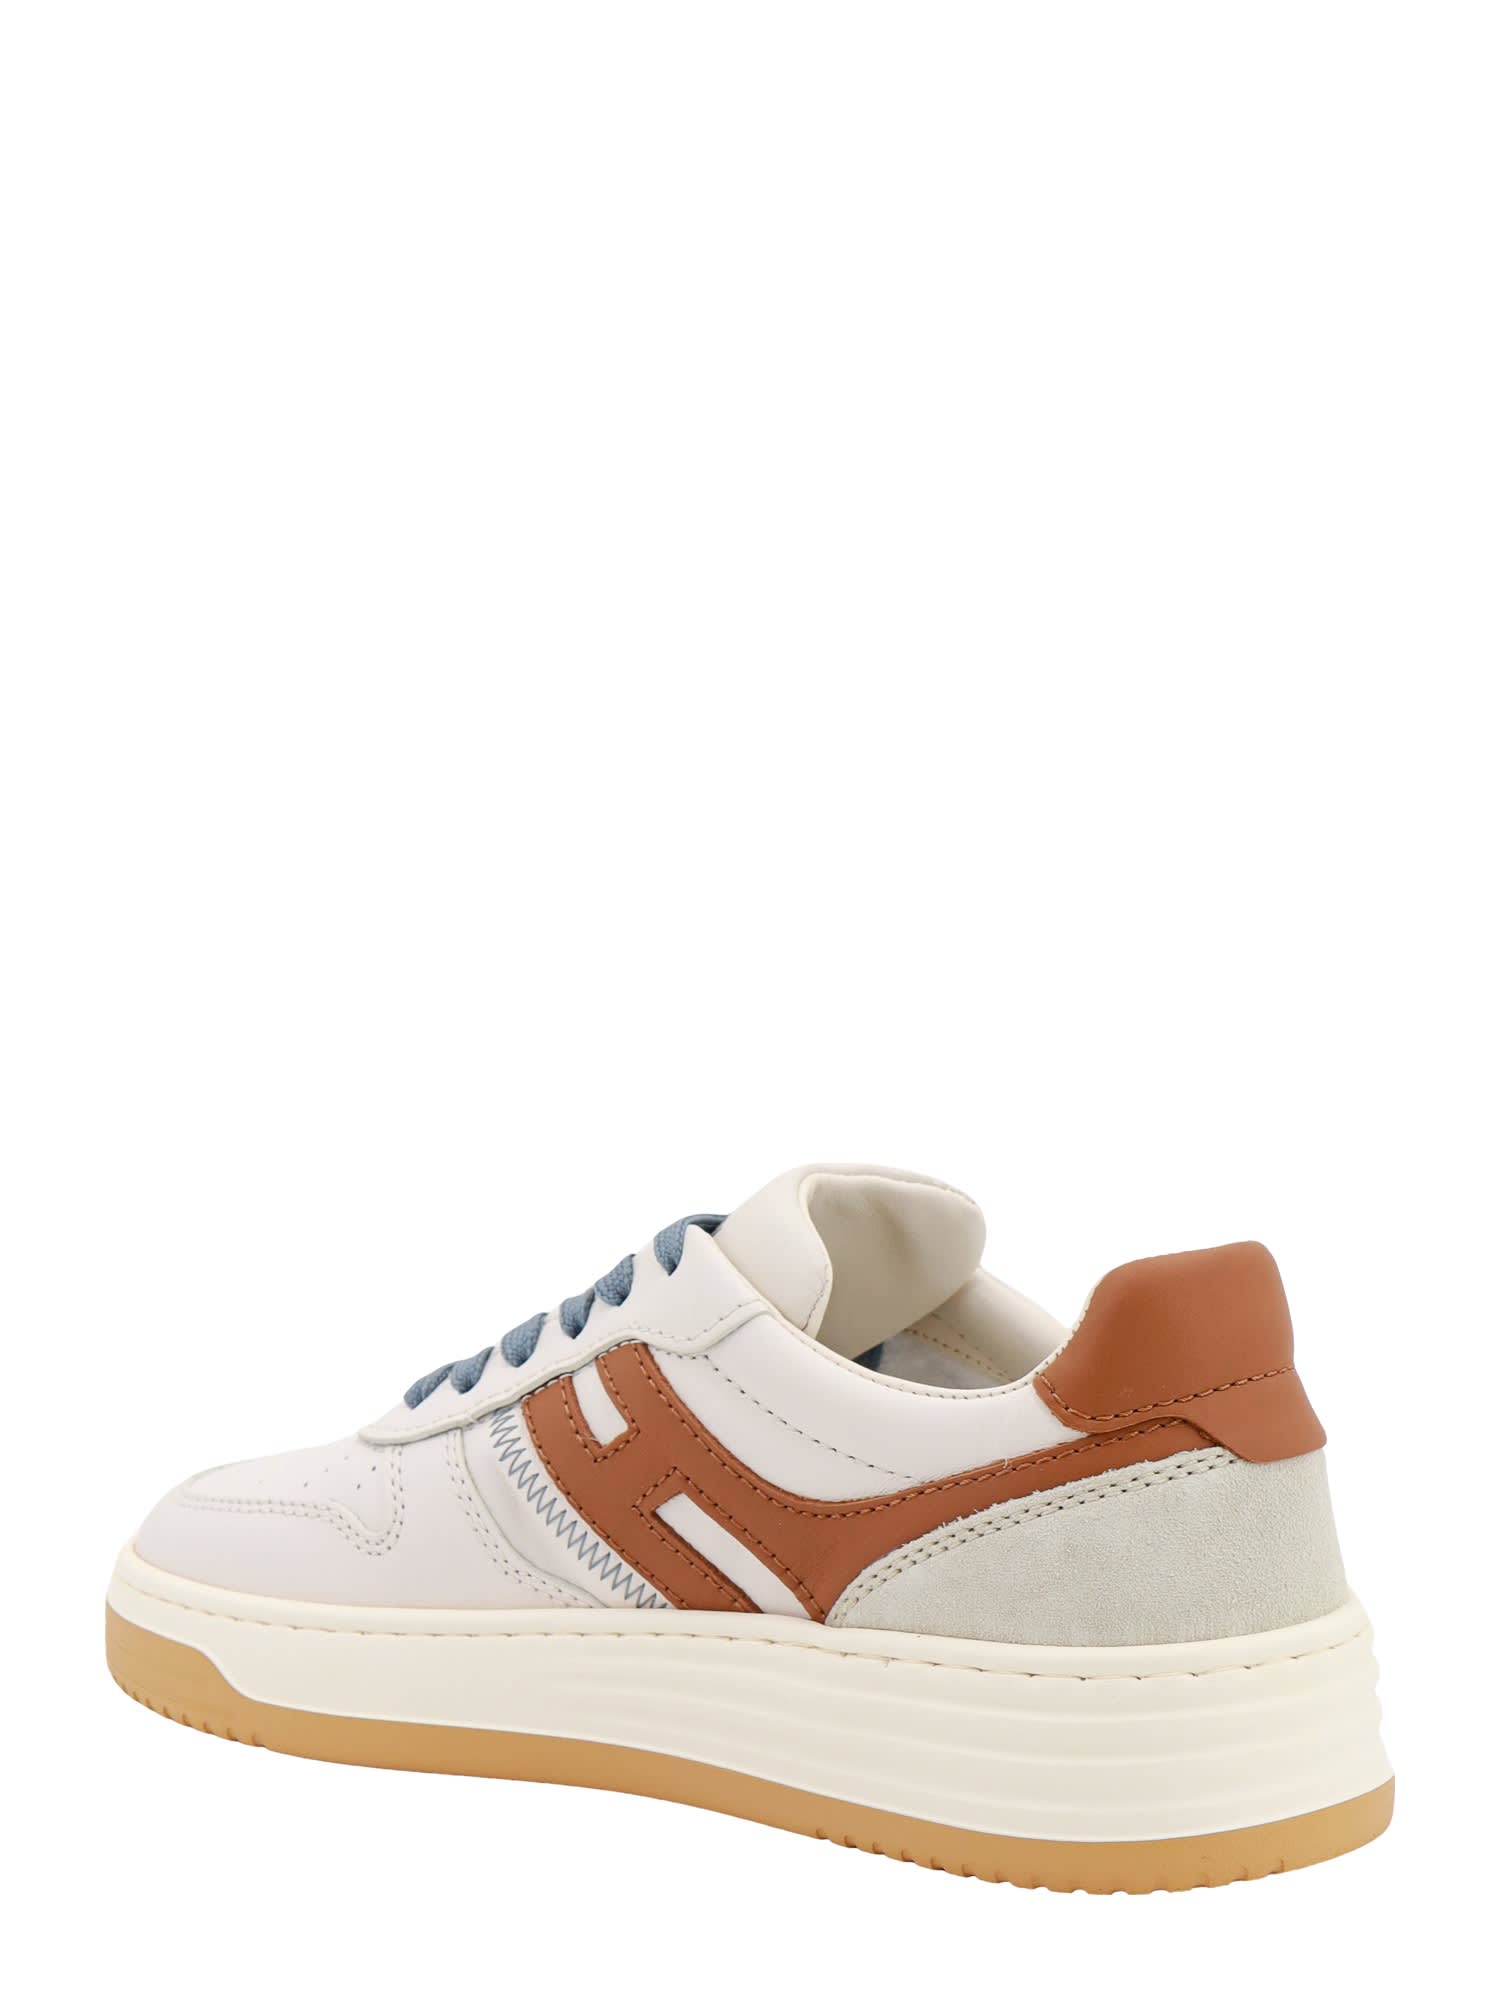 Shop Hogan H630 Sneakers In Leather Brown